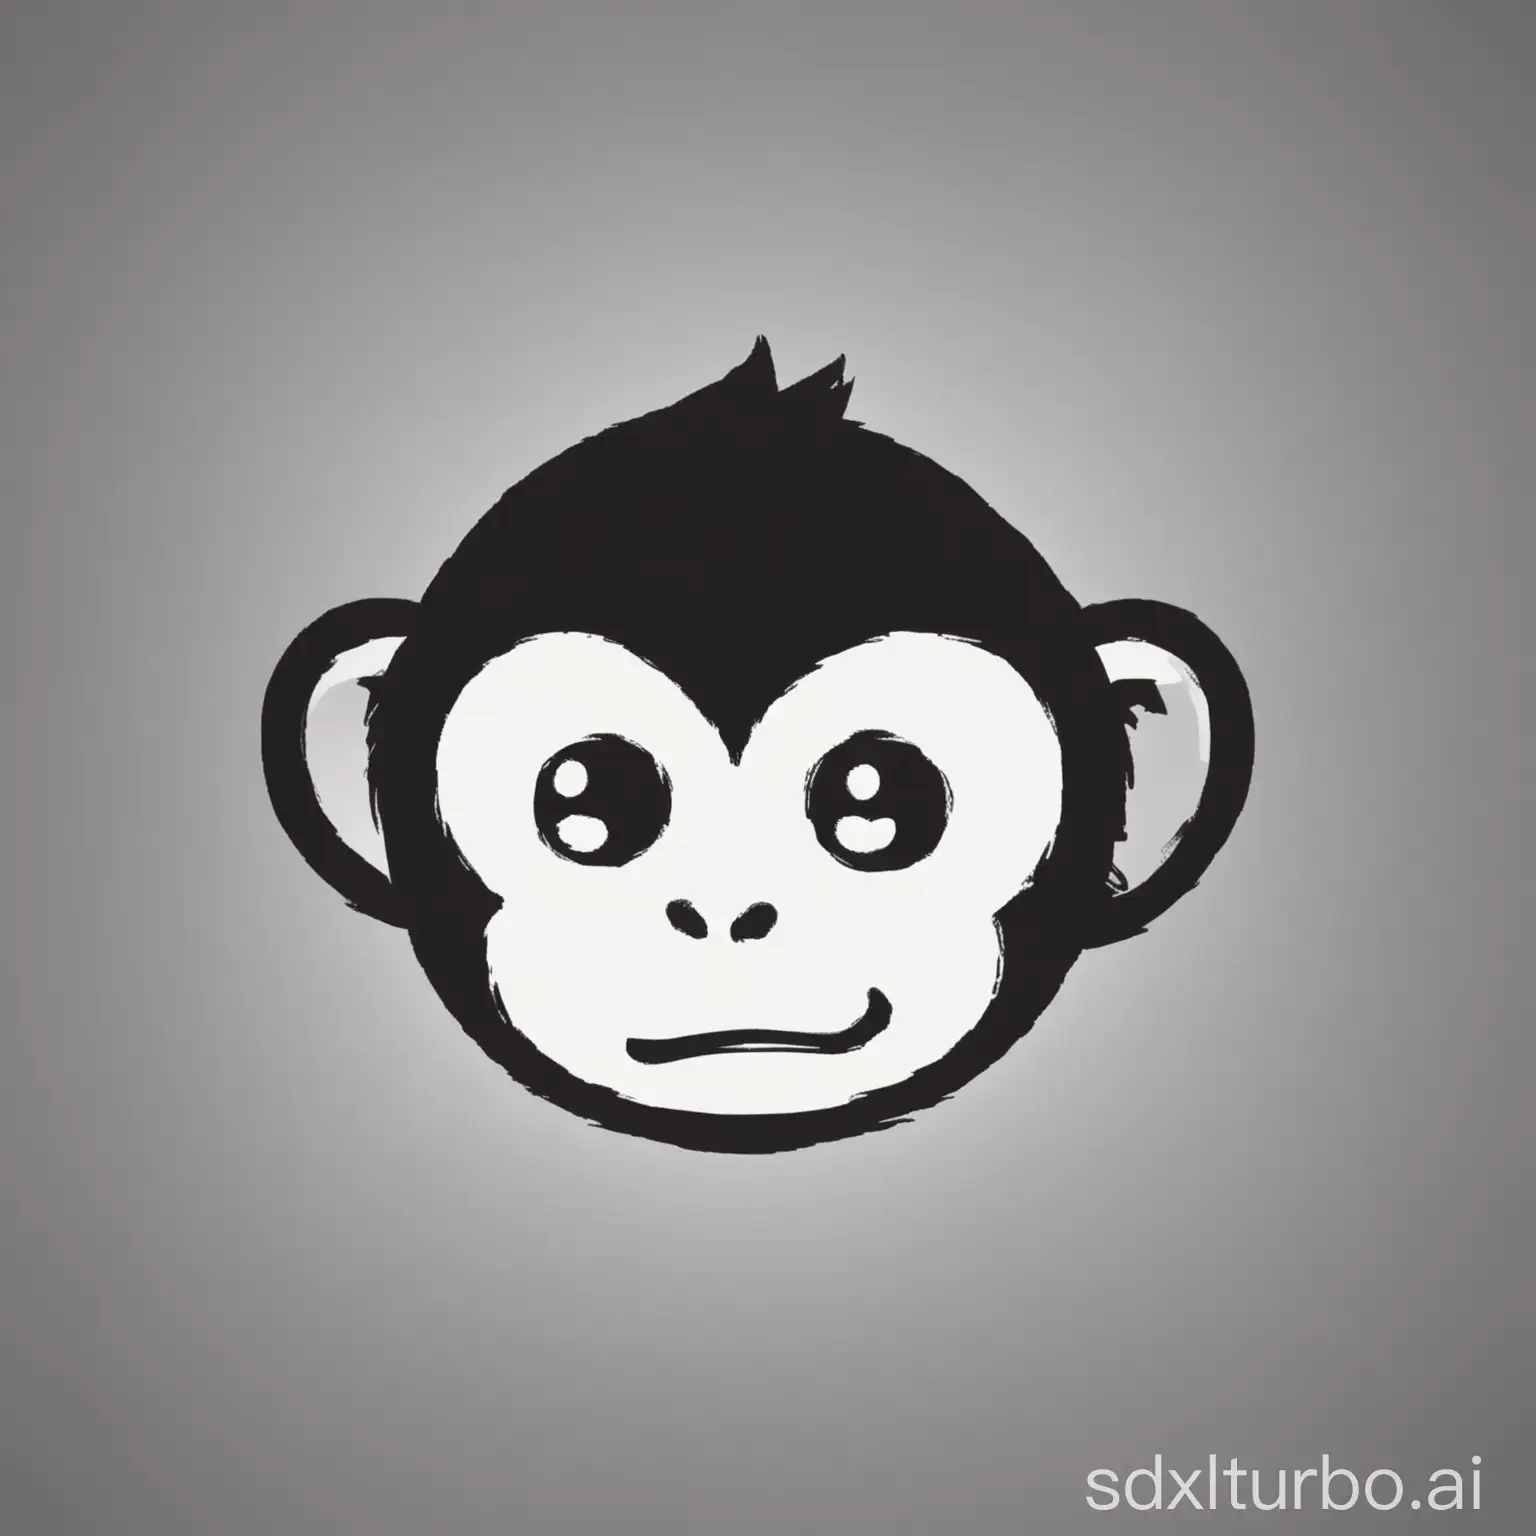 Generate a logo of a little monkey for website logo use, simple and cute with two to three colors, side image of a small monkey, need to be a single-colored image, with a smaller head and lively, best in black and white, cartoon style.